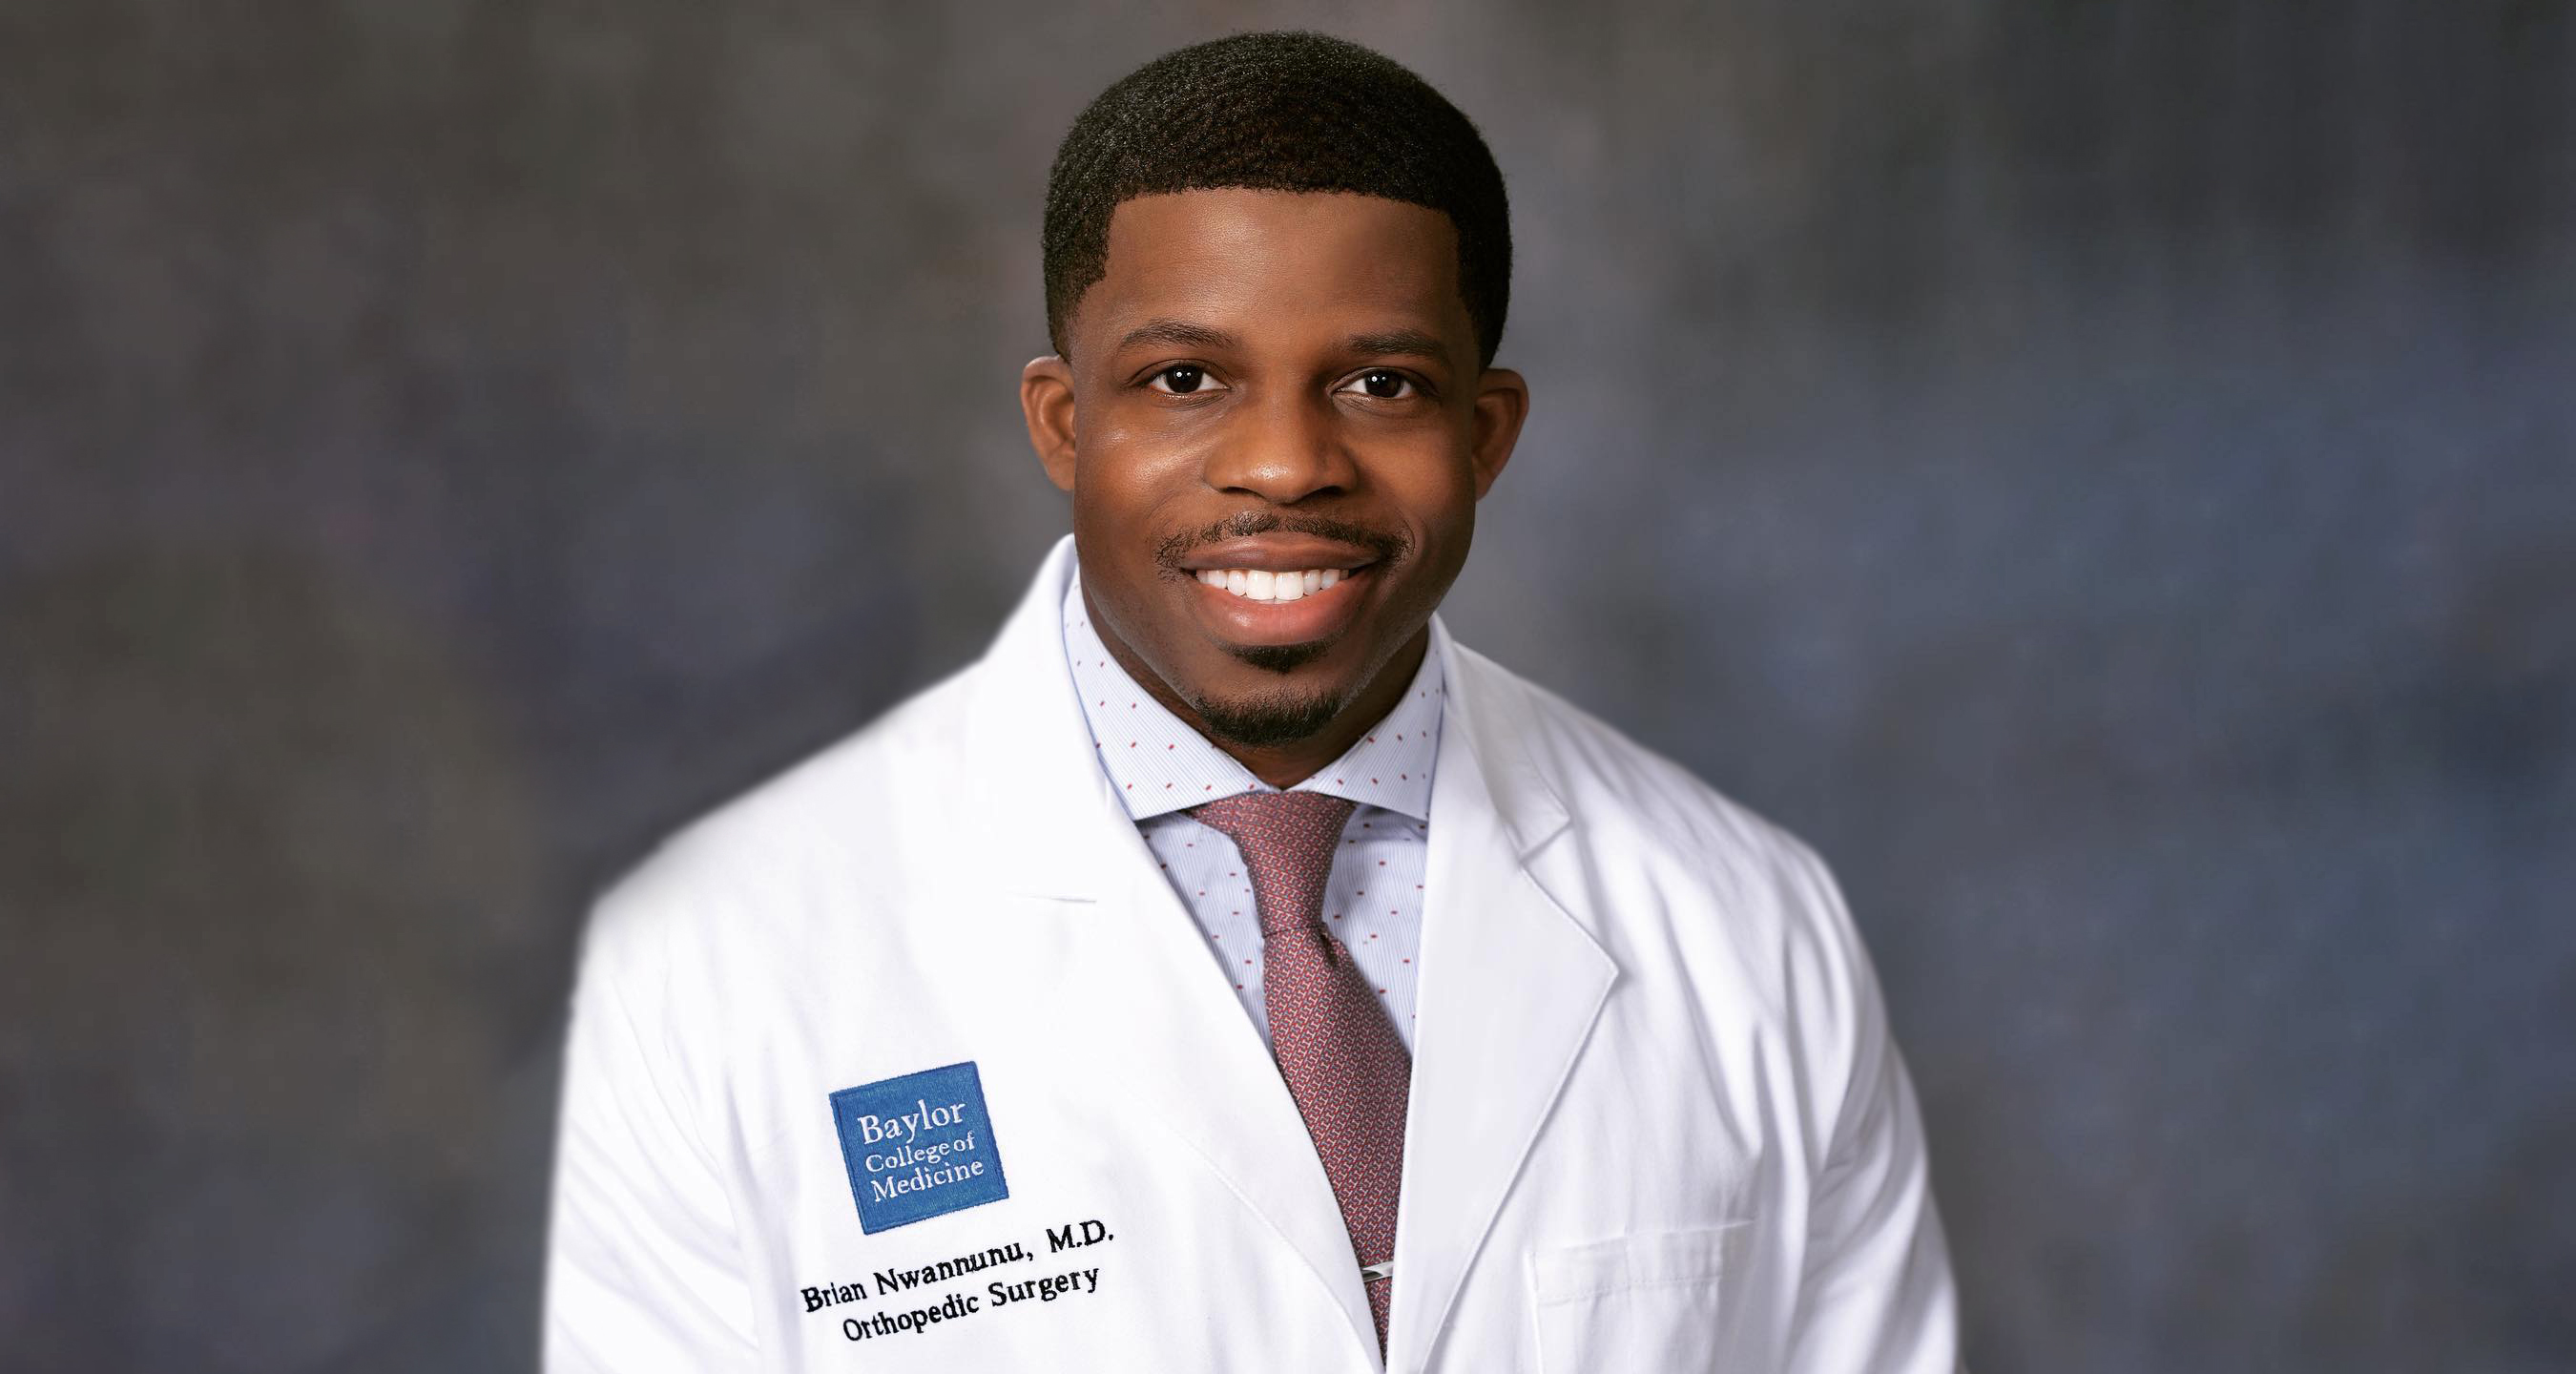 Only 1.9 percent Of Orthopedic Surgeons Identify As Black, Here's How Baylor's Dr. Nwannunu Aims To Change That